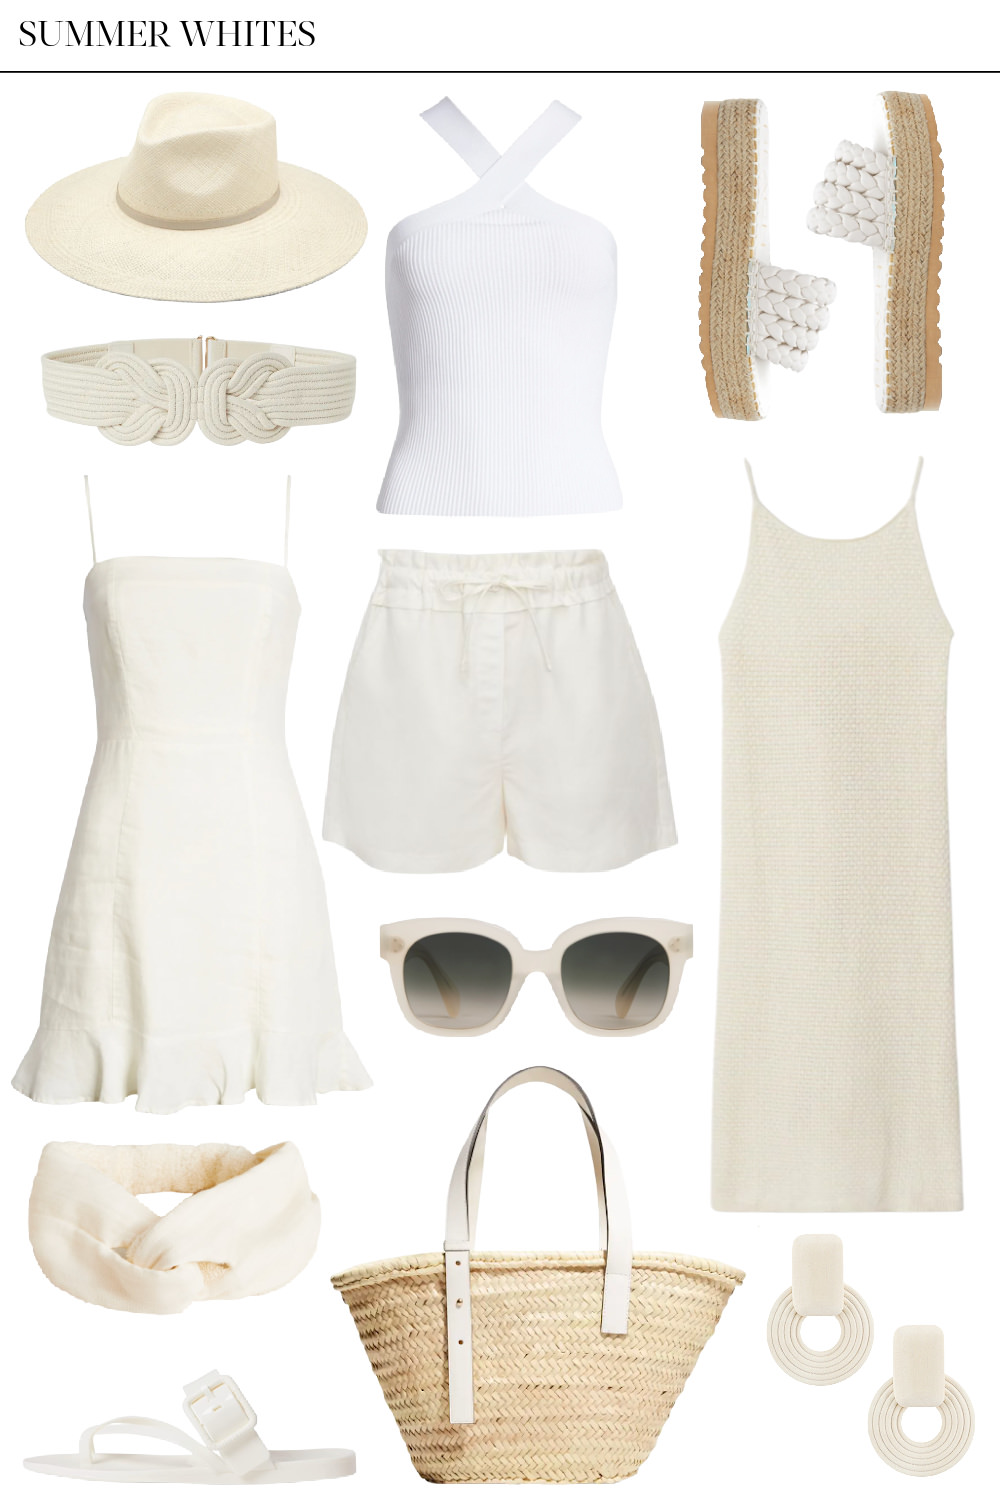 6 All White Summer Outfits